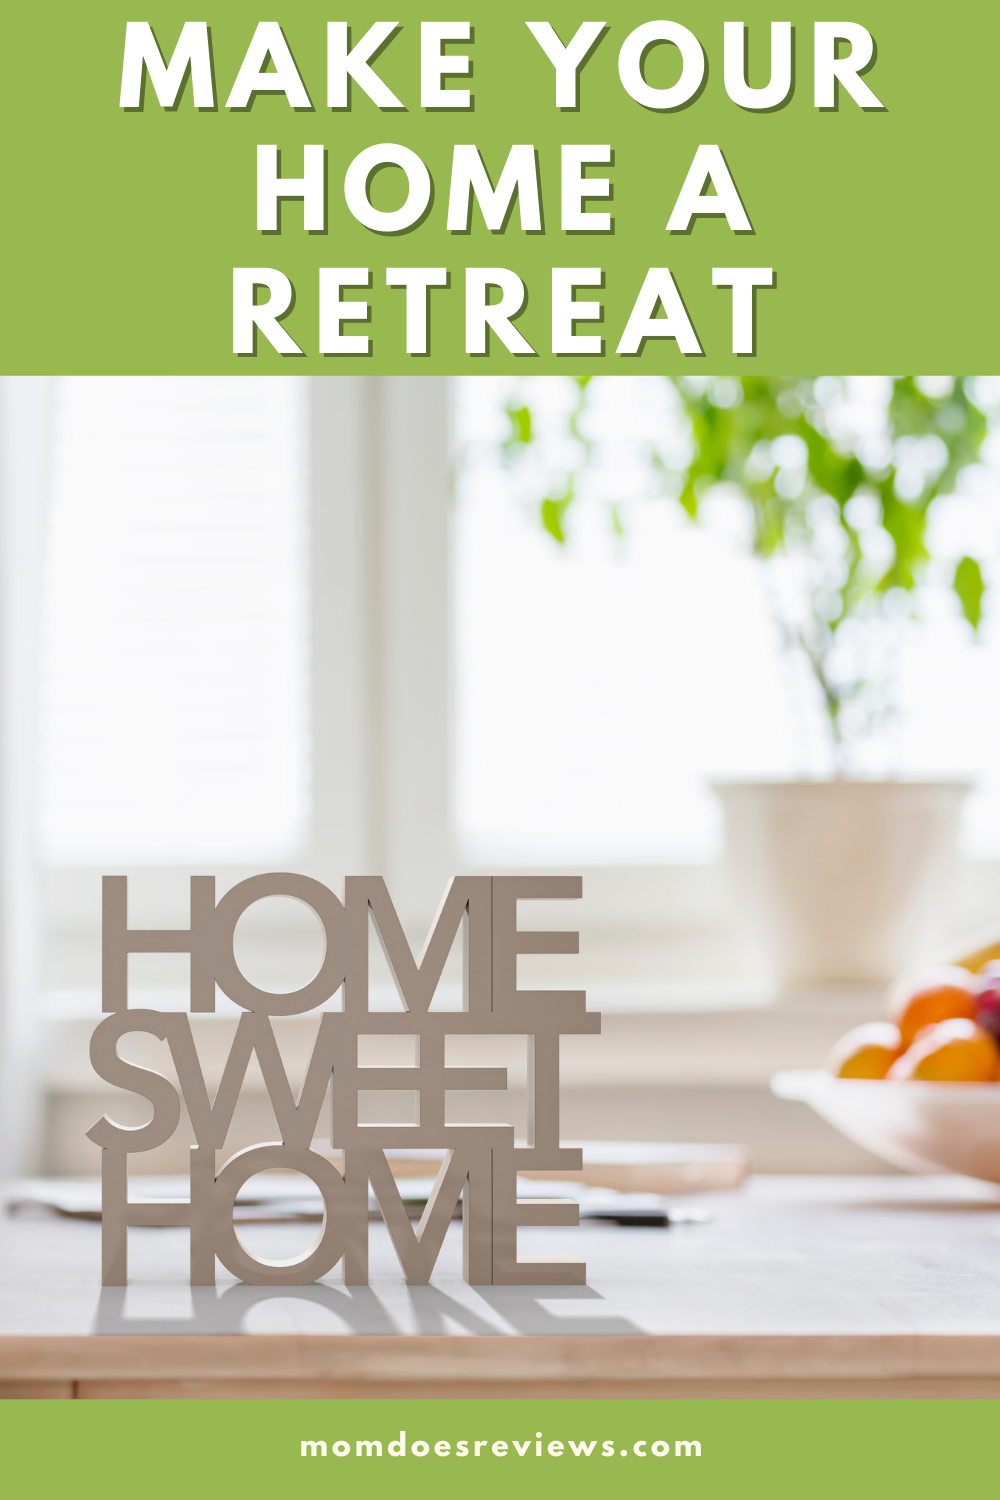 Turn Your Homeplace From Boring to a Beautiful Retreat